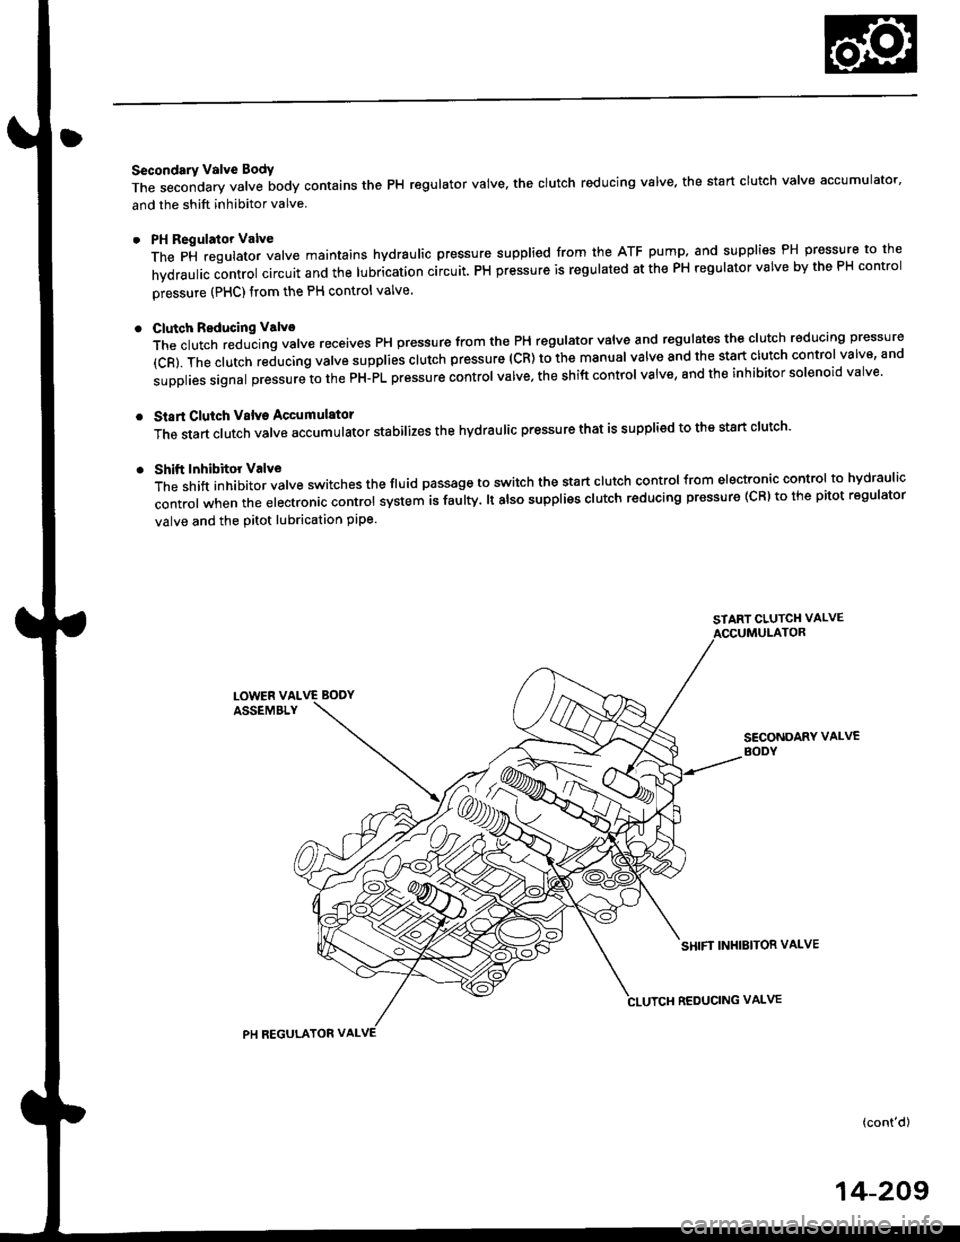 HONDA CIVIC 1996 6.G Workshop Manual Secondary Valve Body
The secondary valve body contains the PH regulator valve. the clutch reducing valve the start clutch valve accumulator
and the shift inhibitor valve
PH Regulator Valve
The pi re